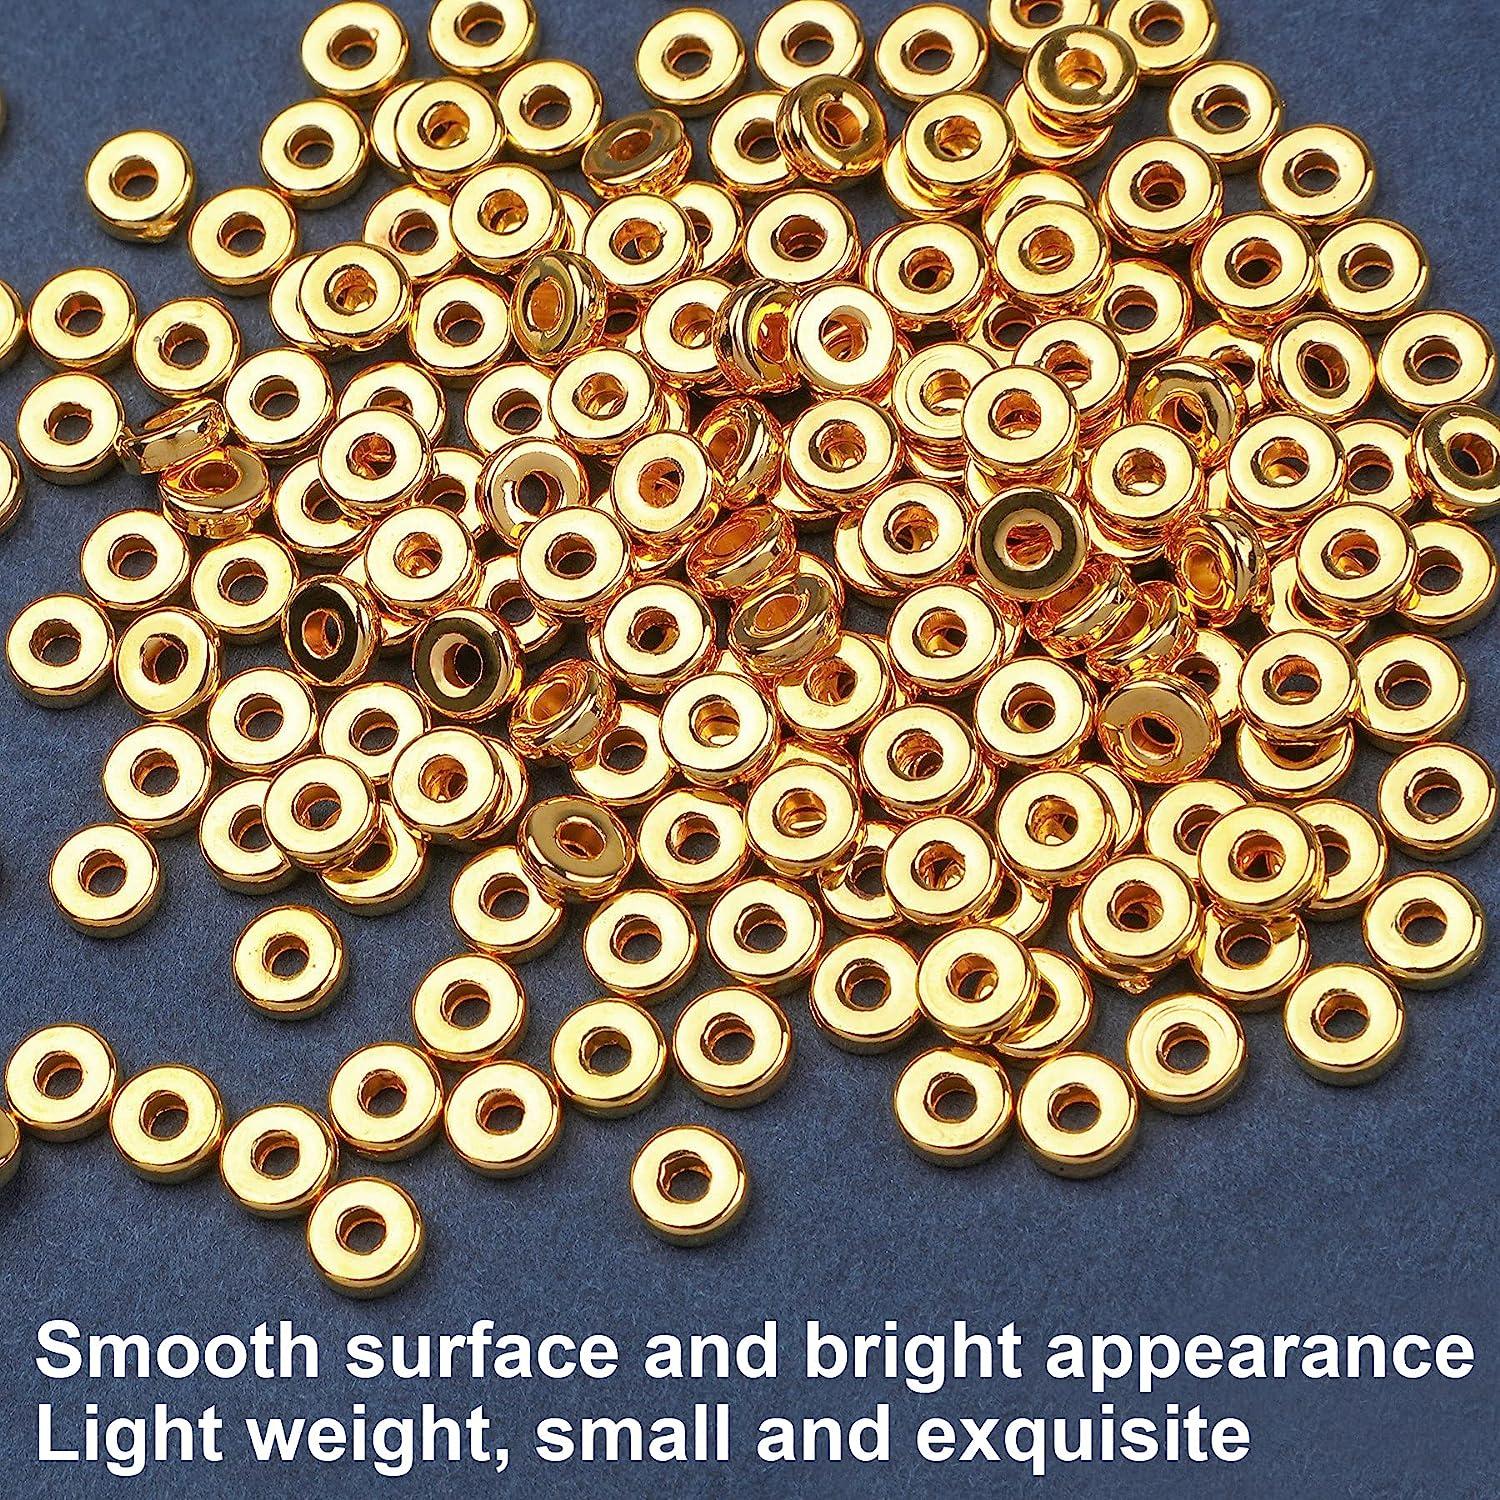  1500Pcs 10 Styles Gold Spacer Beads Assorted Jewelry Making  Loose Beads for DIY Bracelet Necklace Earring Craft Making